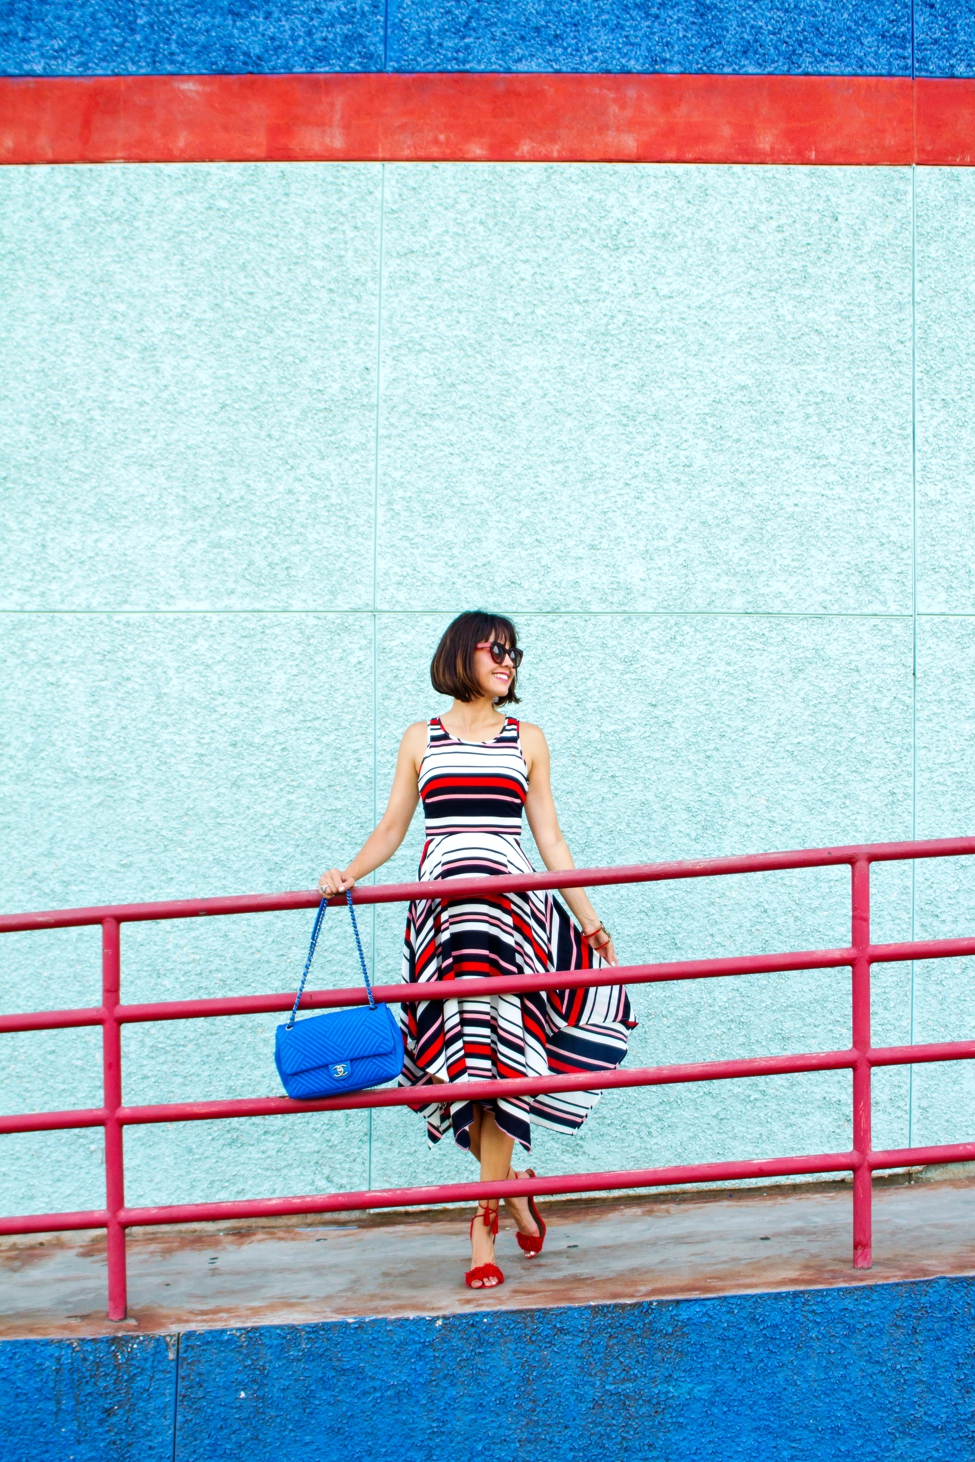 Wear Where Well ModCloth Workwear Red White Blue dress_0001